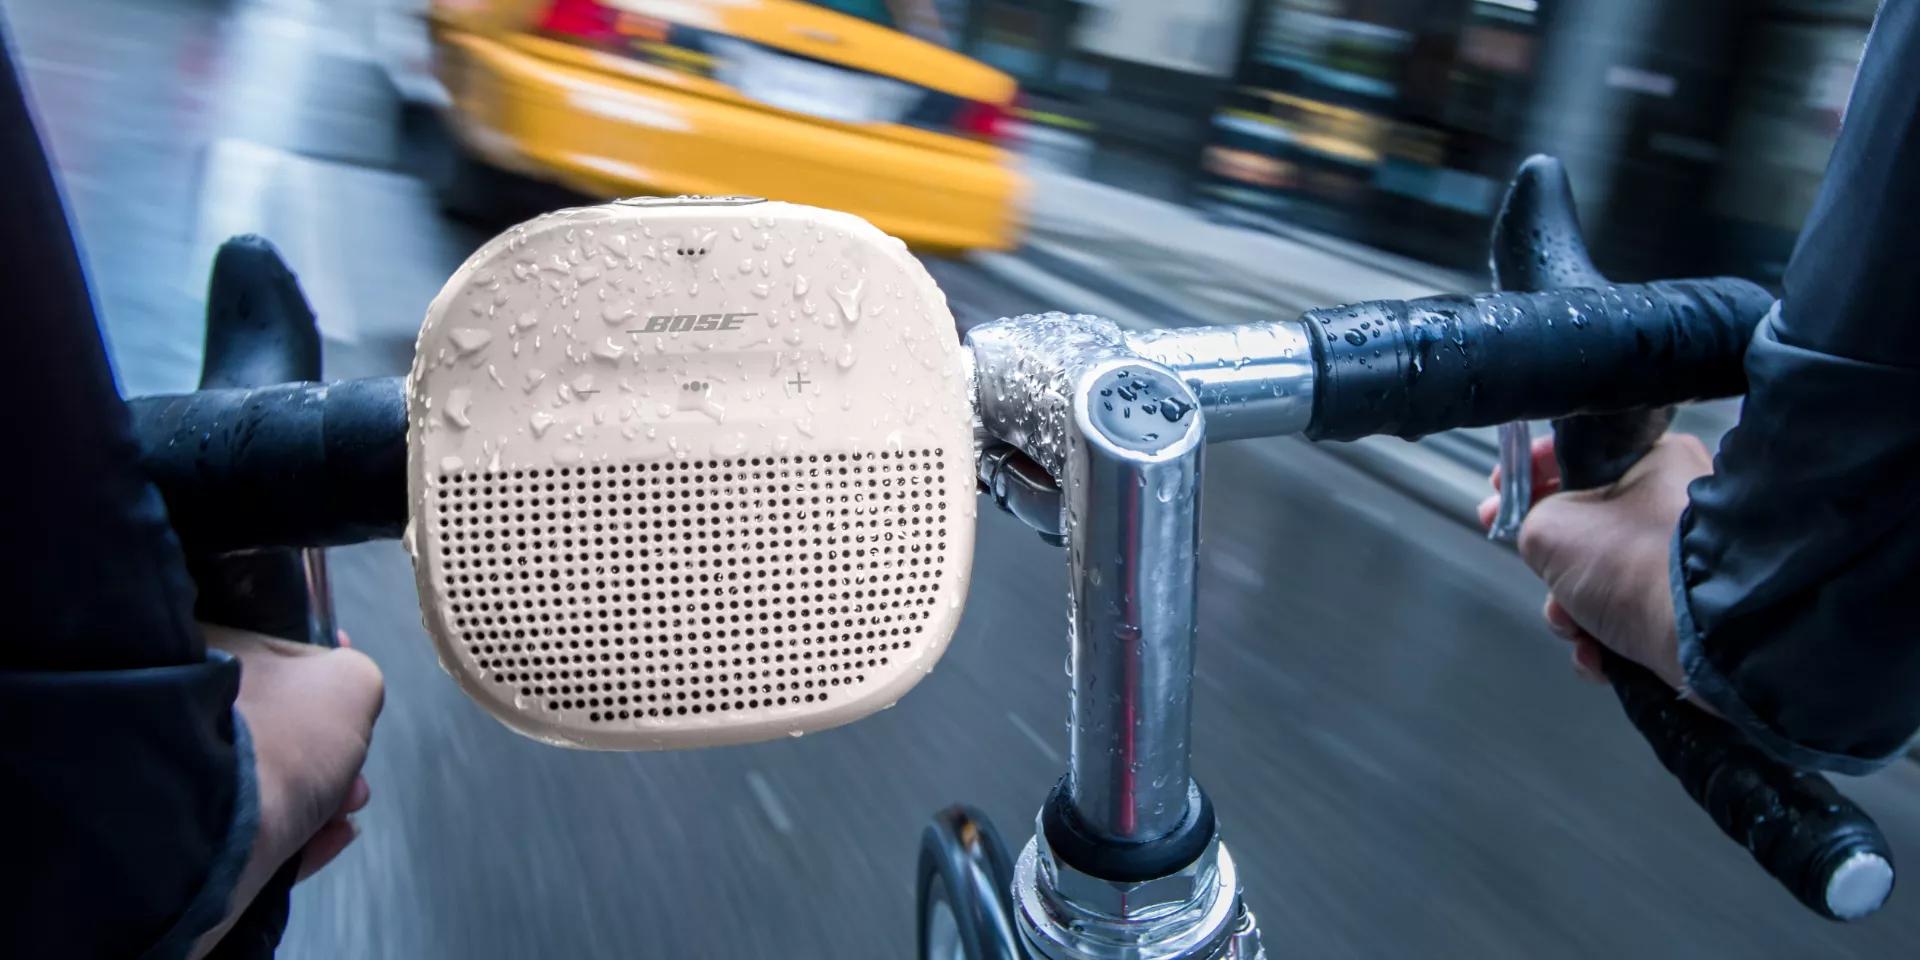 White Smoke SoundLink Micro Bluetooth speaker attached to handlebars of a bicycle